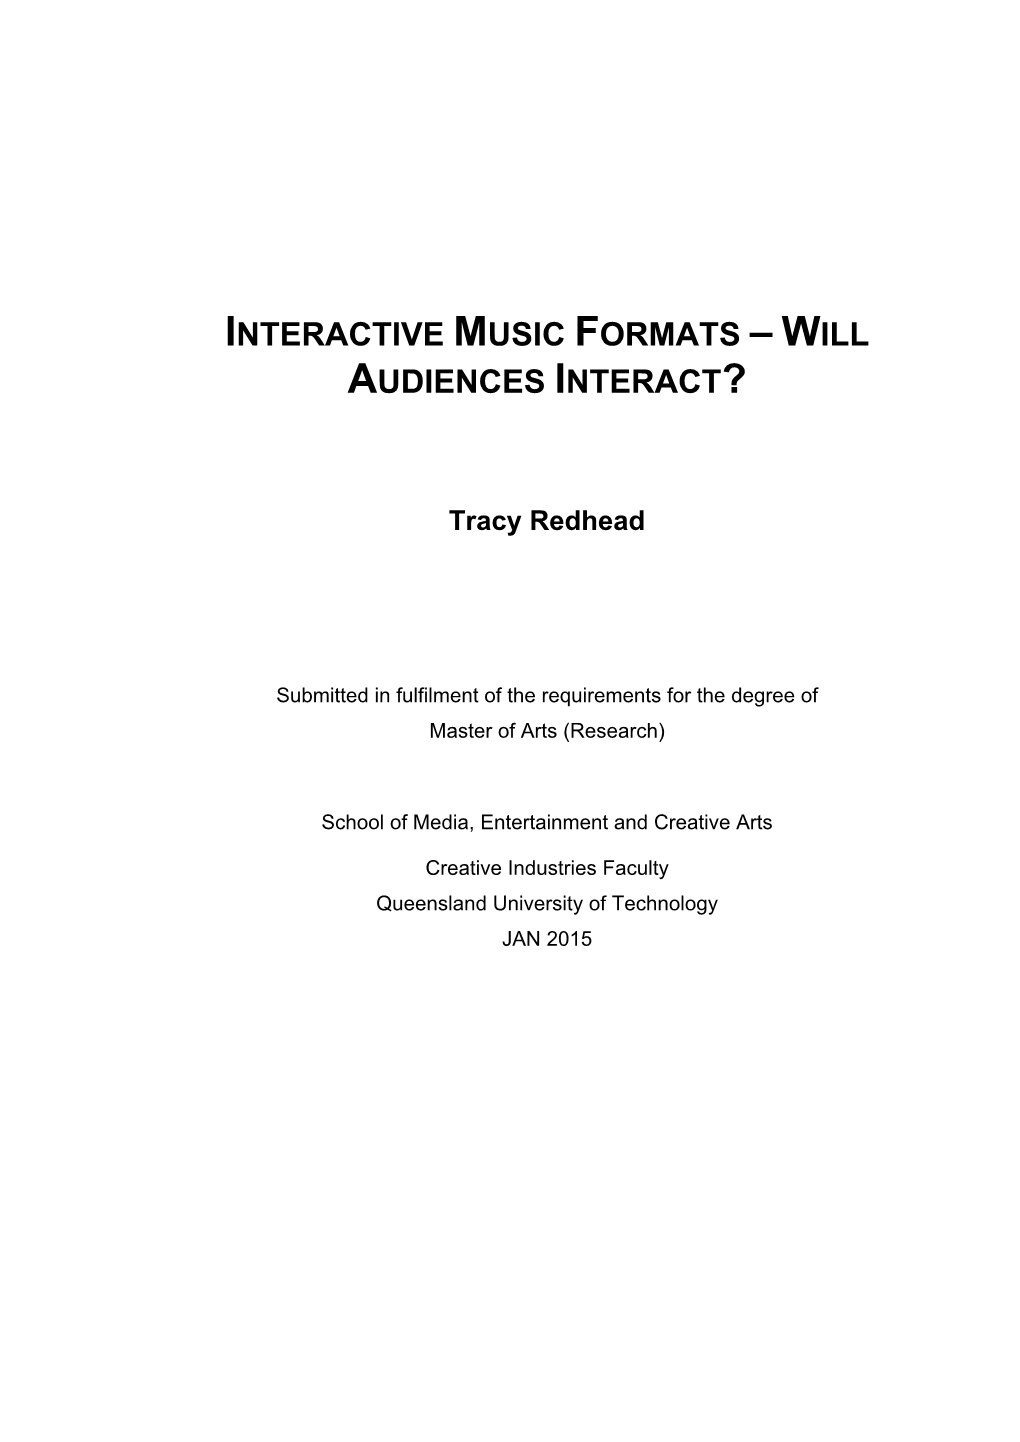 Interactive Music Formats – Will Audiences Interact?